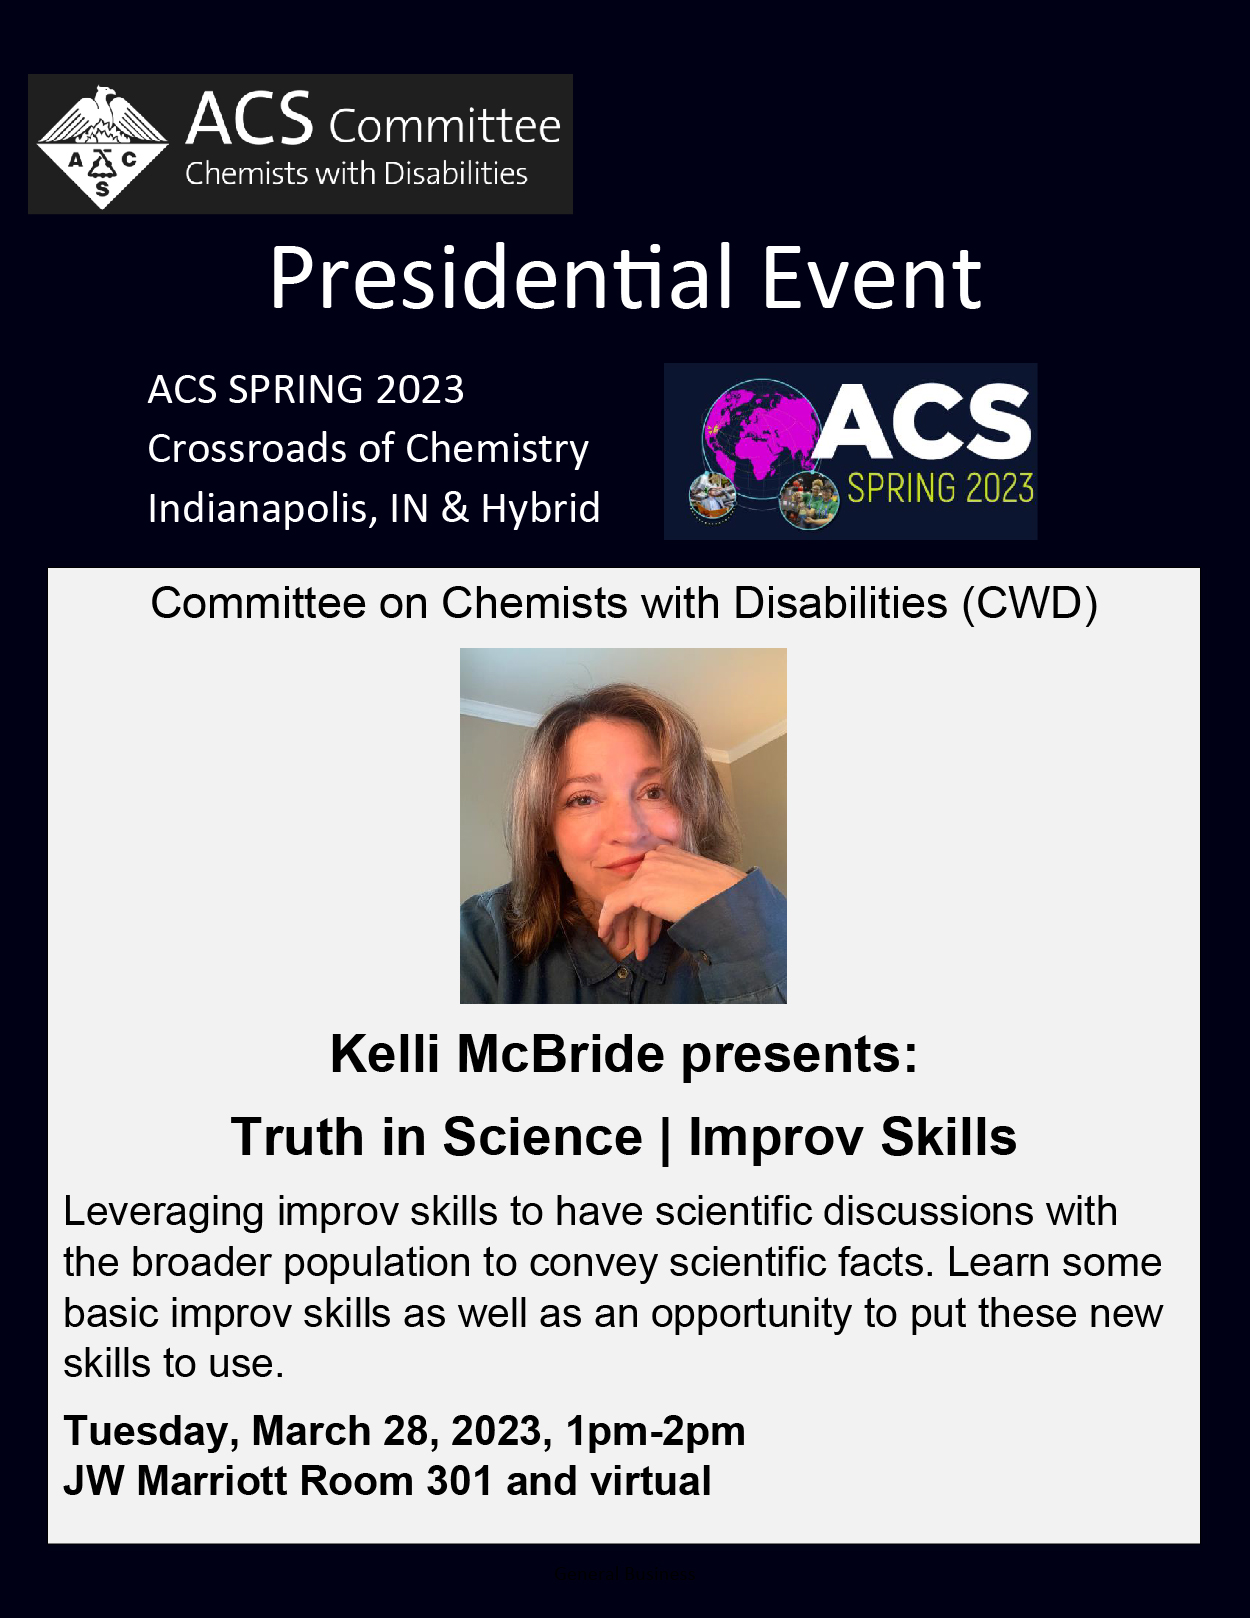 Keli McBride Presents : Truth in Science | Improv Skills; Tuesday, March 28, 2023, 1pm-2pm; JW Marriott Room 301 and virtual; 
Leveraging improv skills to have scientific discussions with the broader population to convey scientific facts. Learn some basic improv skills as well as an opportunity to put these new skills to use.
 